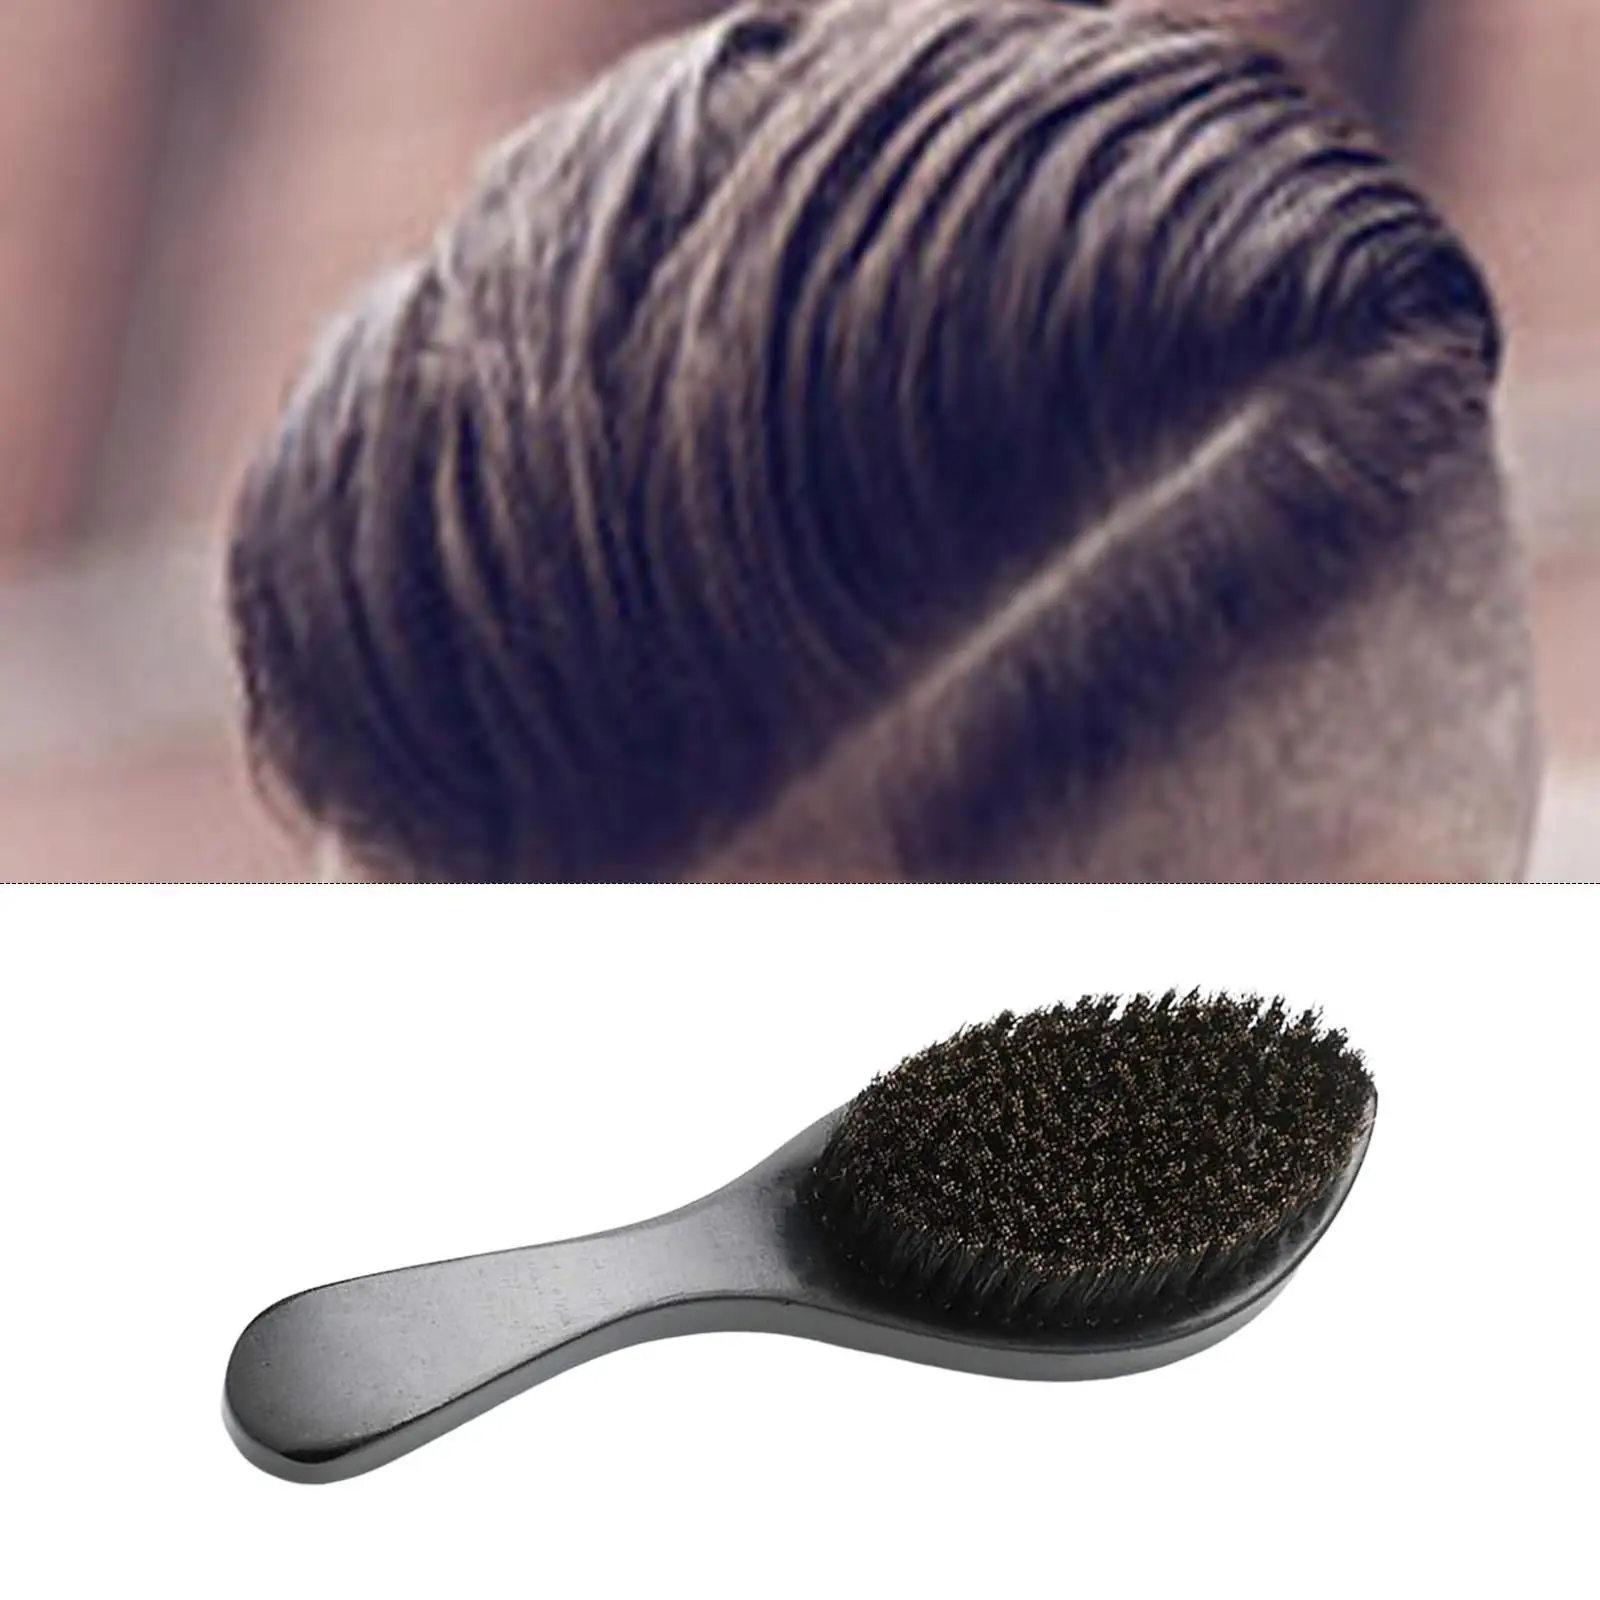 Unique Boar Bristle Beard Brush Soft Hair Styling Comfort Durable Wooden Styling Comb Grooming Tool